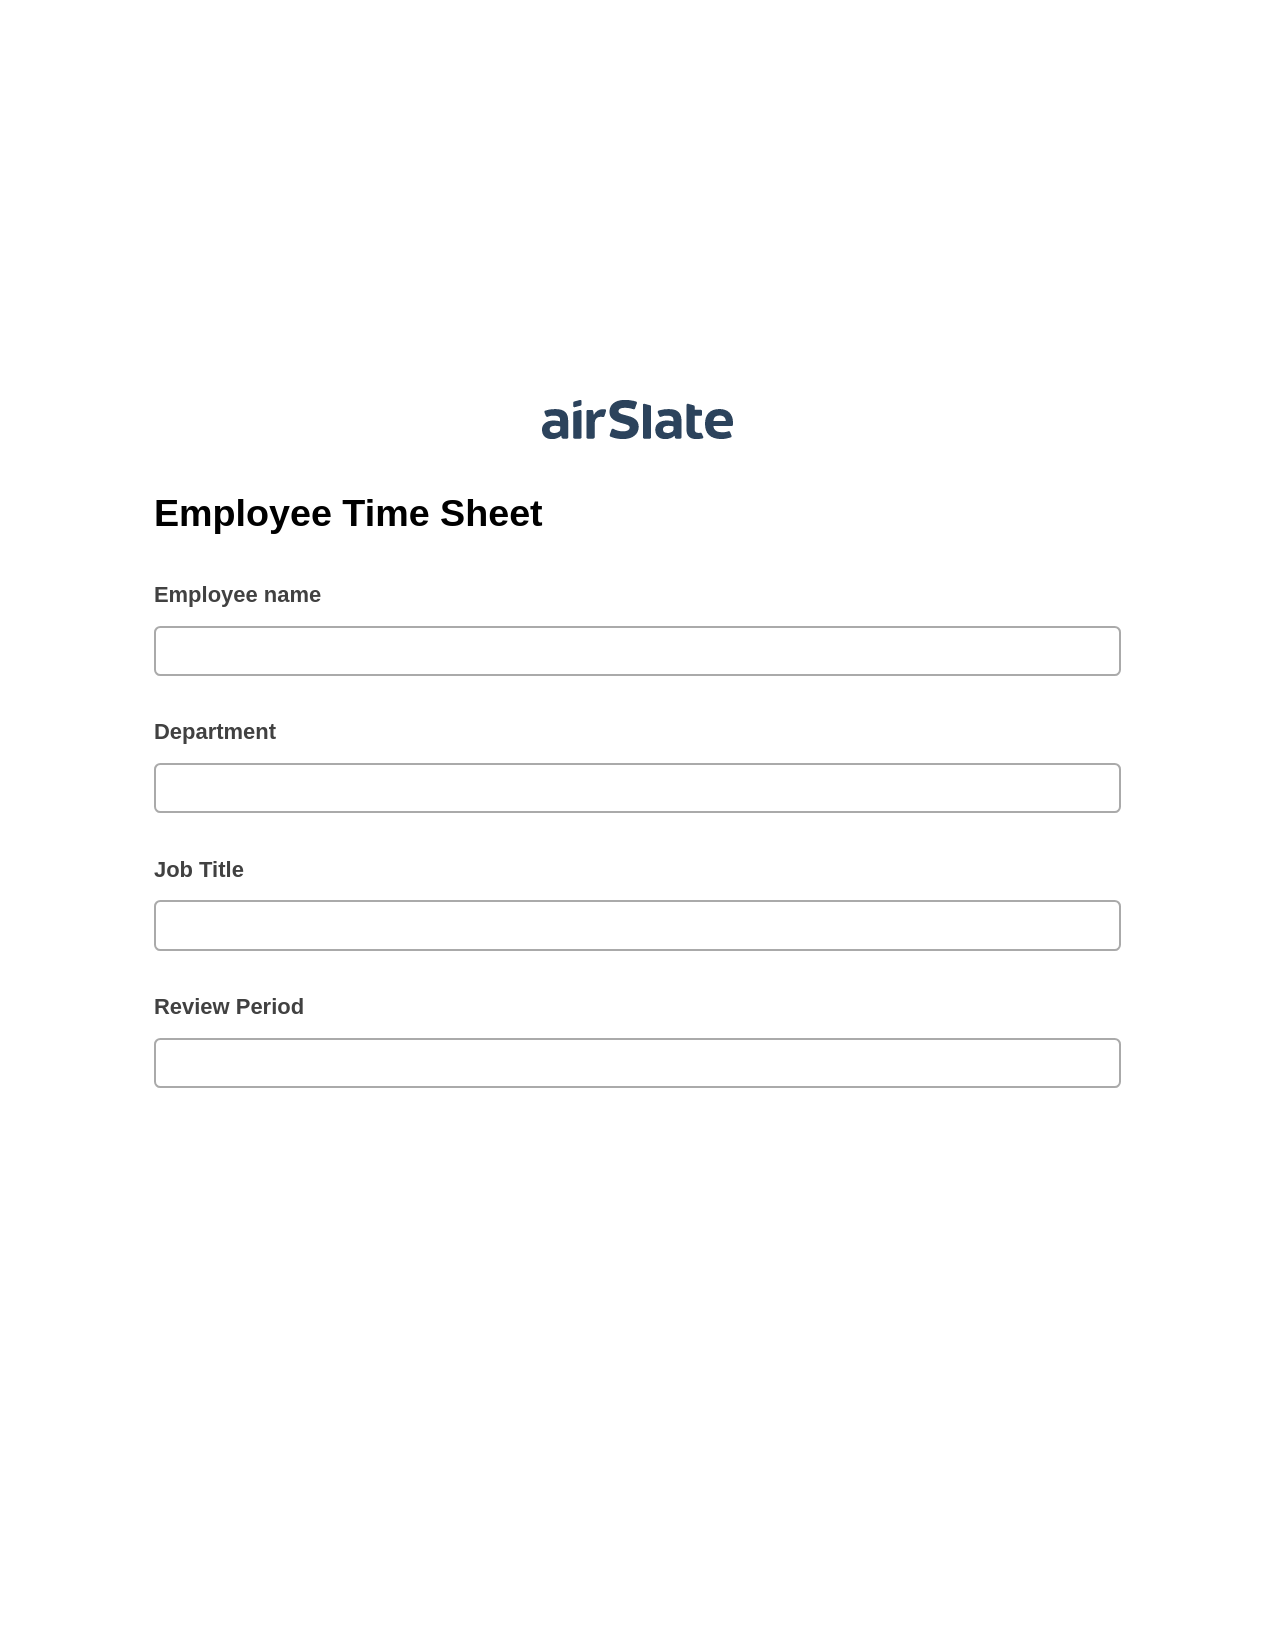 Multirole Employee Time Sheet Prefill from NetSuite records, Email Notification Bot, Post-finish Document Bot